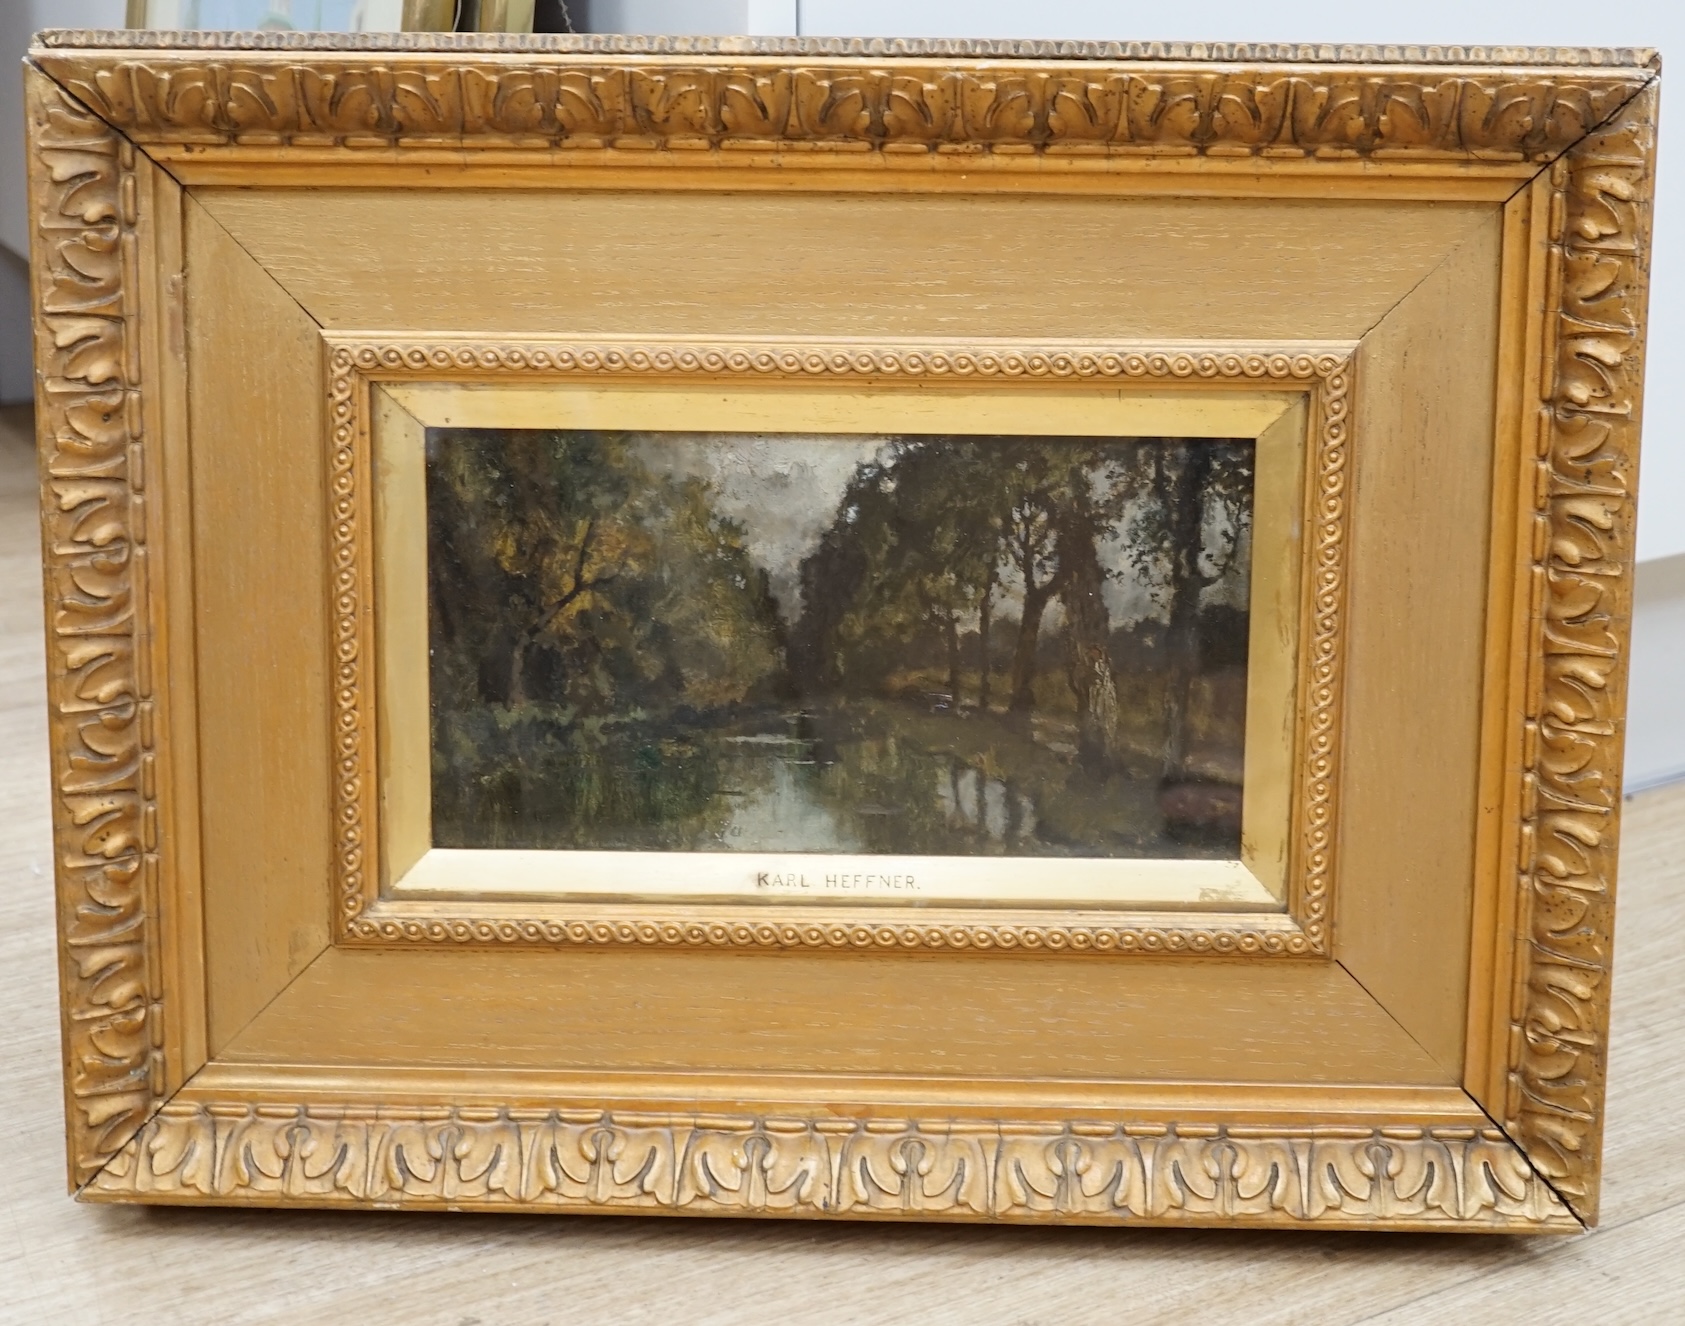 Karl Heffner (1849-1925), oil on artist's board, Study from nature, Bavaria, unsigned, inscribed to the mount, stencil verso 977J, 14 x 26cm, ornately framed. Condition - fair to good, a little dirty